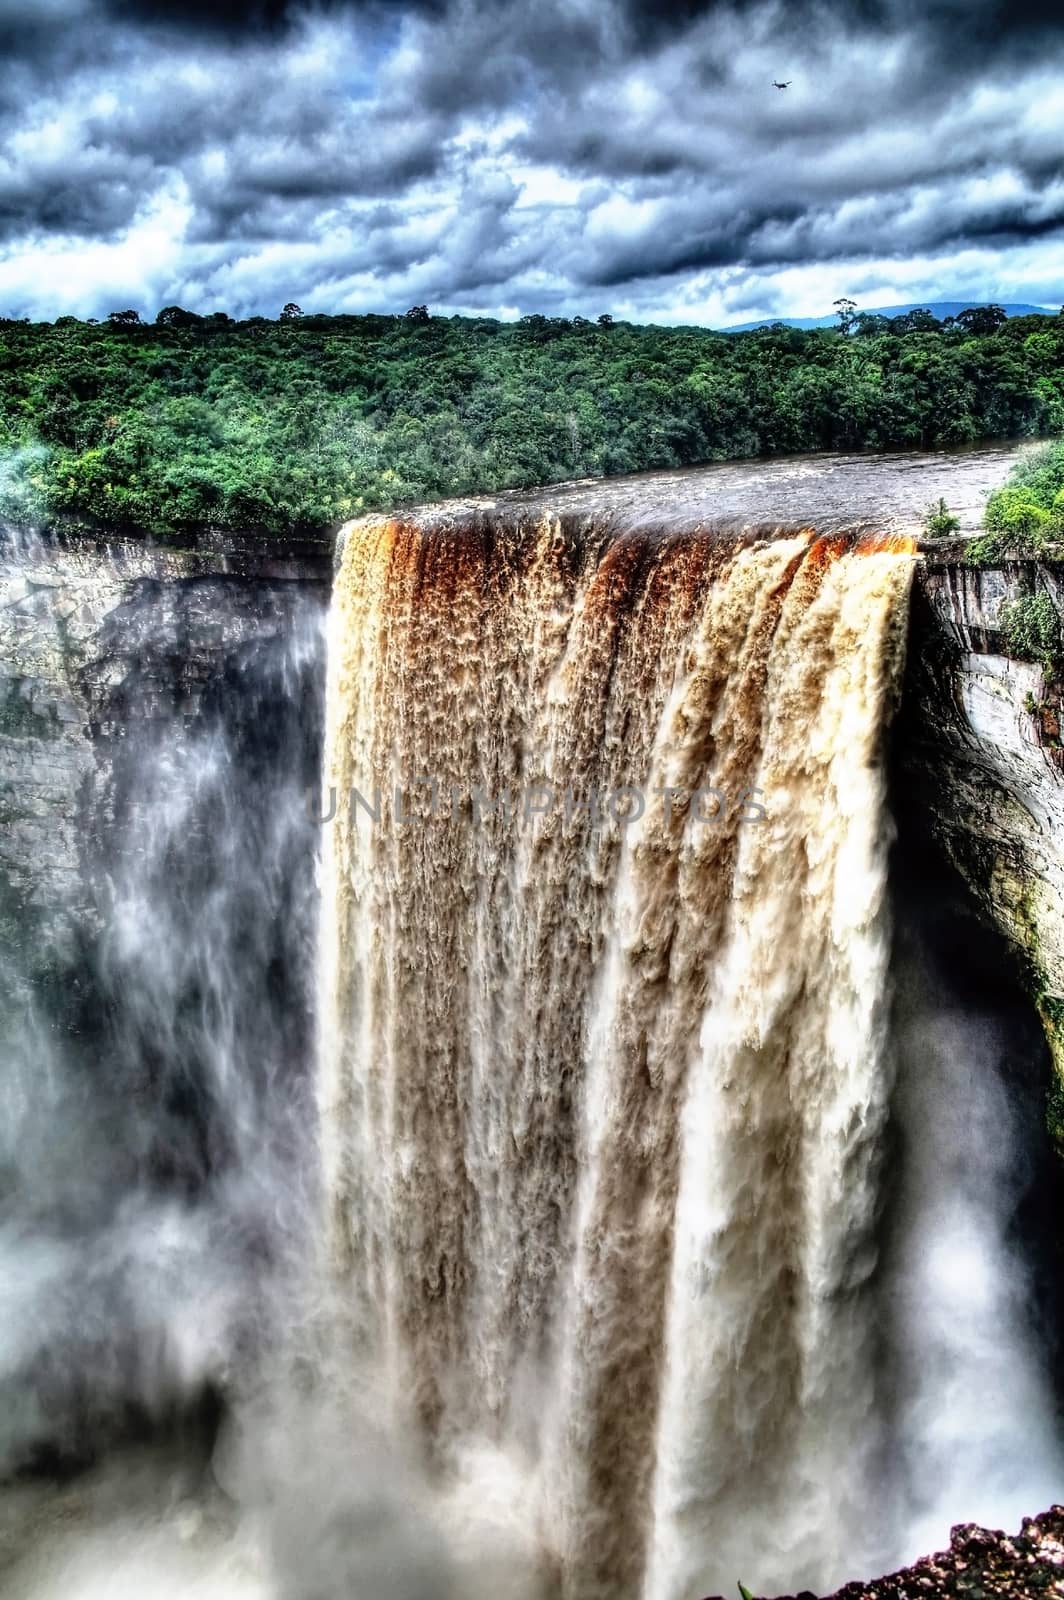 Kaieteur waterfall, one of the tallest falls in the world, potaro river, Guyana